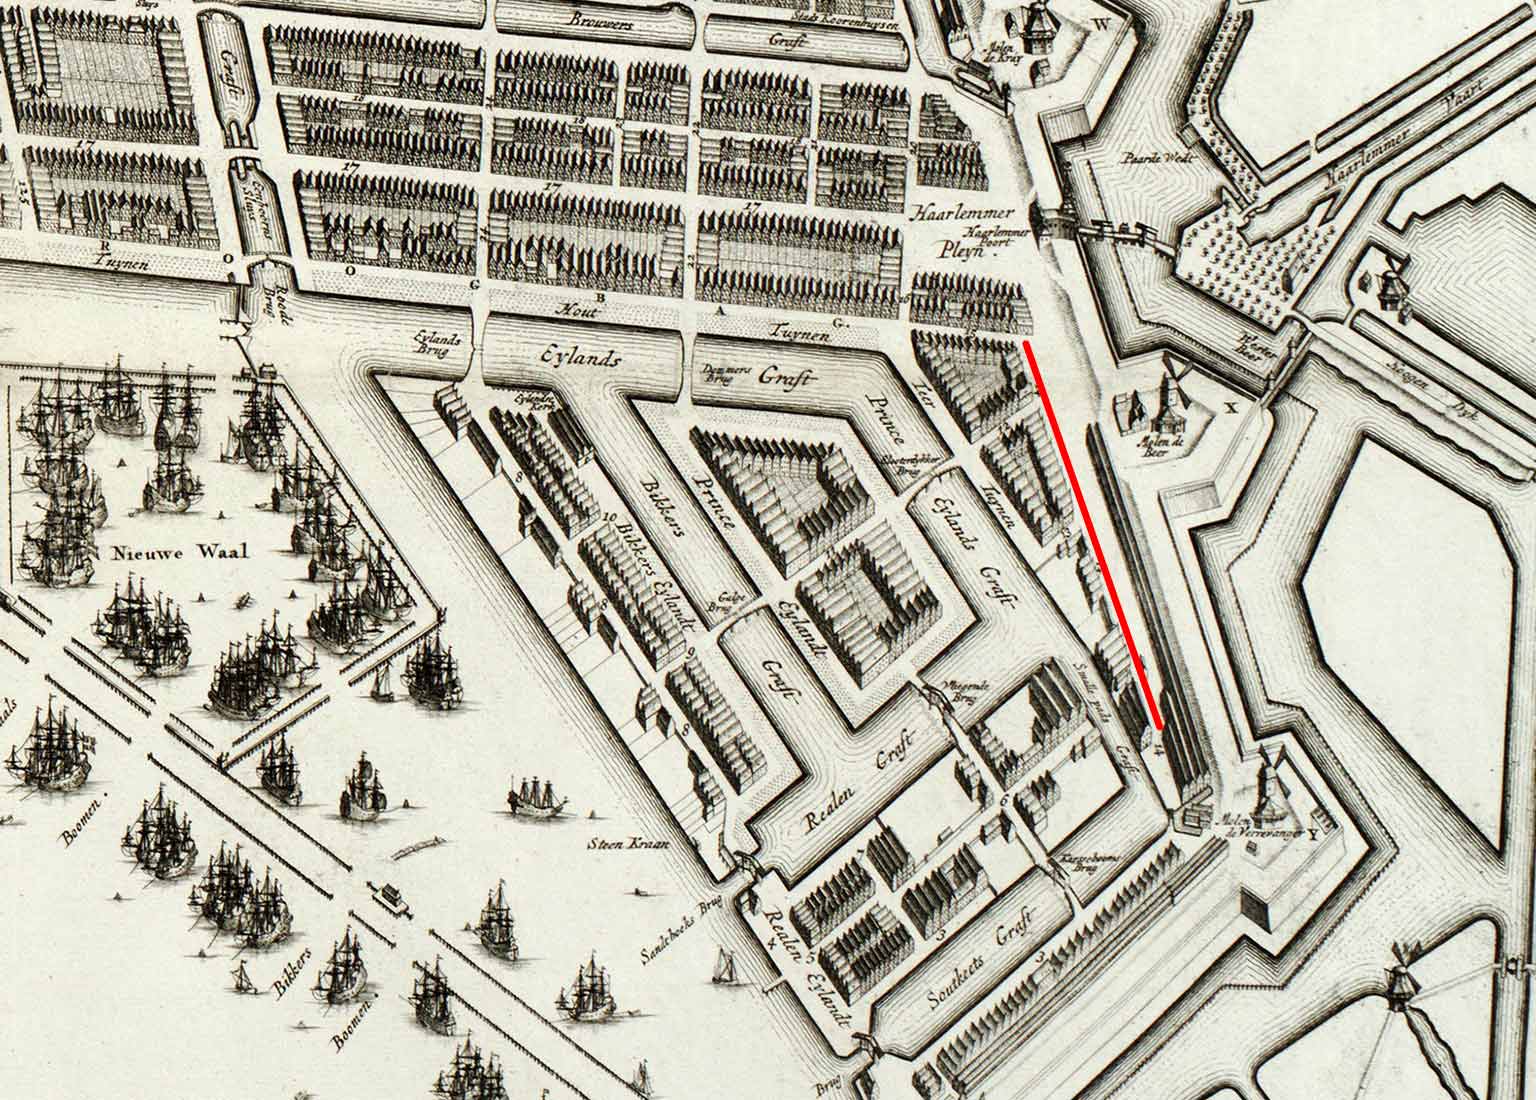 Former Smallepad (current Planciusstraat), Amsterdam, detail of a map from 1737